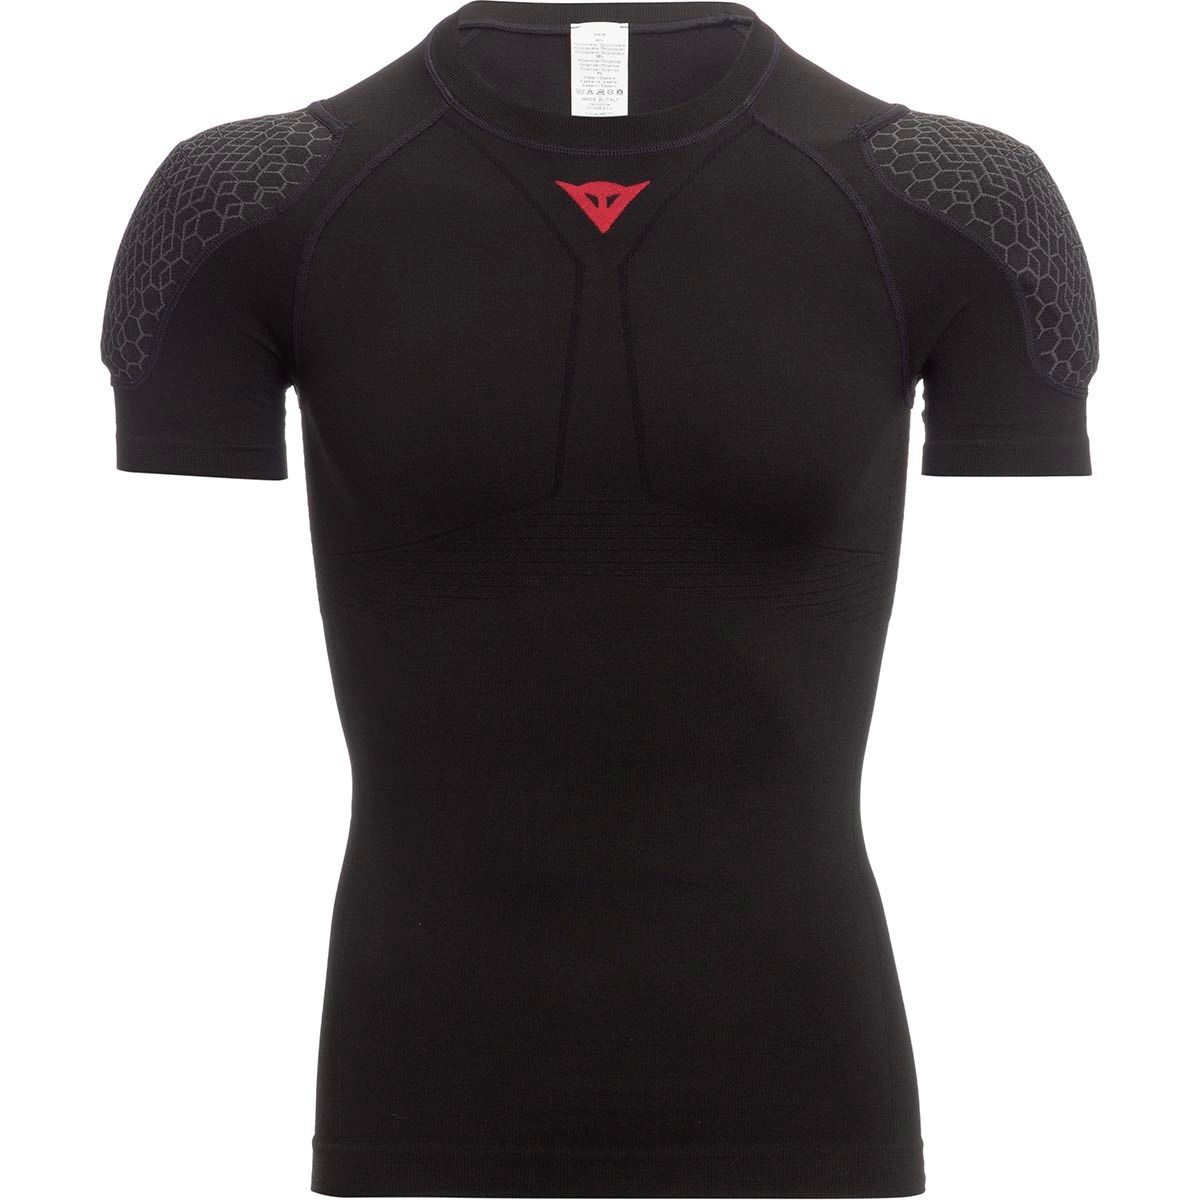 Dainese Trailknit Pro Armor Top